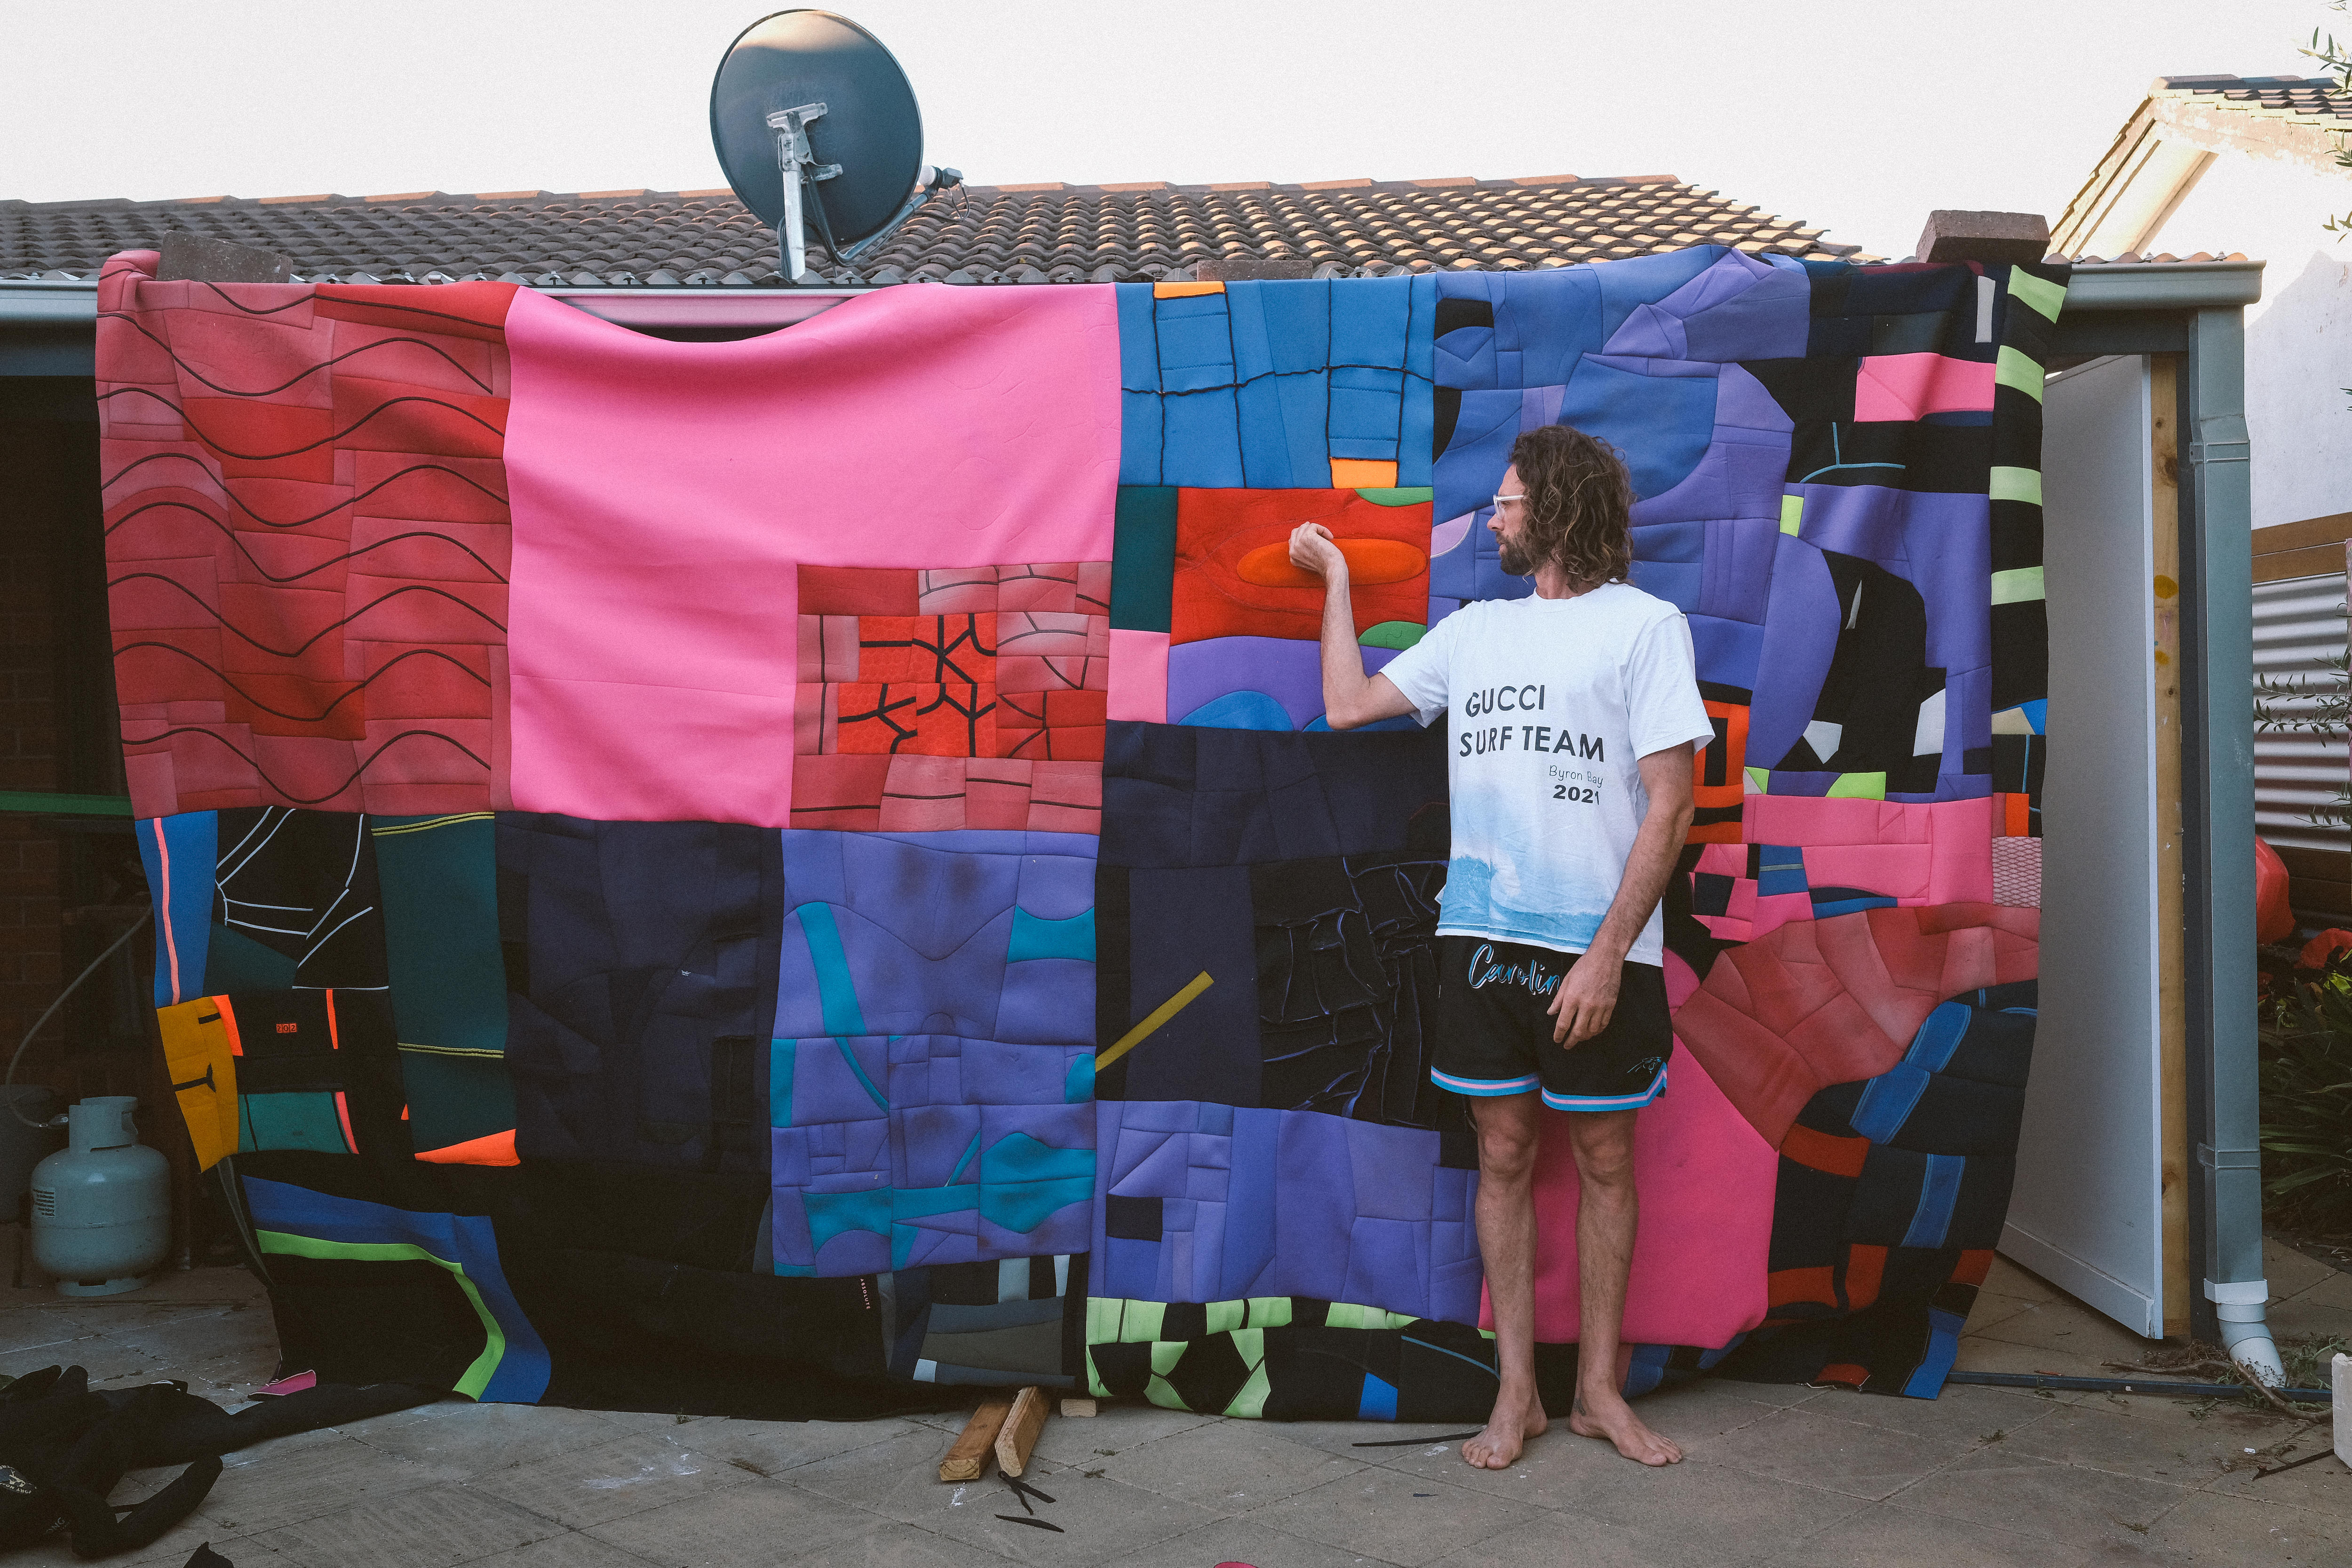 Artist stands in backyard in front of a large painting hanging up, made out of wetsuit fabric